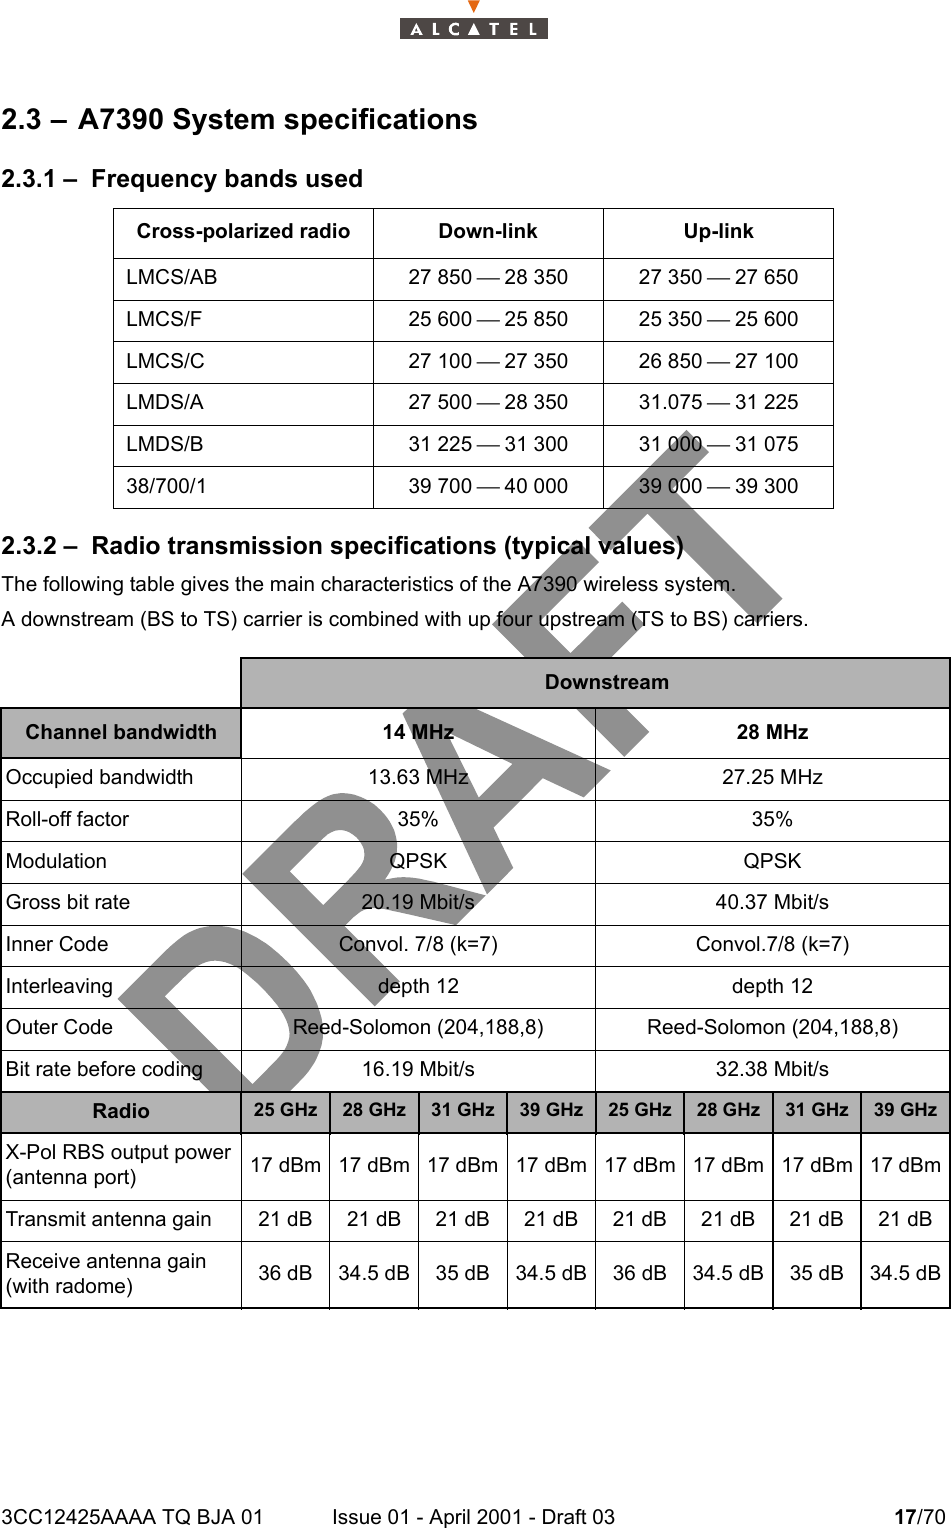 3CC12425AAAA TQ BJA 01 Issue 01 - April 2001 - Draft 03 17/70242.3 – A7390 System specifications2.3.1 – Frequency bands used2.3.2 – Radio transmission specifications (typical values)The following table gives the main characteristics of the A7390 wireless system.A downstream (BS to TS) carrier is combined with up four upstream (TS to BS) carriers.Cross-polarized radio Down-link Up-linkLMCS/AB 27 850  28 350 27 350  27 650LMCS/F 25 600  25 850 25 350  25 600LMCS/C 27 100  27 350 26 850  27 100LMDS/A 27 500  28 350 31.075  31 225LMDS/B 31 225  31 300 31 000  31 07538/700/1 39 700  40 000 39 000  39 300    DownstreamChannel bandwidth 14 MHz 28 MHzOccupied bandwidth 13.63 MHz 27.25 MHzRoll-off factor 35% 35%Modulation QPSK QPSKGross bit rate 20.19 Mbit/s 40.37 Mbit/sInner Code Convol. 7/8 (k=7) Convol.7/8 (k=7)Interleaving depth 12 depth 12Outer Code Reed-Solomon (204,188,8) Reed-Solomon (204,188,8)Bit rate before coding 16.19 Mbit/s 32.38 Mbit/sRadio 25 GHz 28 GHz 31 GHz 39 GHz 25 GHz 28 GHz 31 GHz 39 GHzX-Pol RBS output power (antenna port) 17 dBm 17 dBm 17 dBm 17 dBm 17 dBm 17 dBm 17 dBm 17 dBmTransmit antenna gain 21 dB 21 dB 21 dB 21 dB 21 dB 21 dB 21 dB 21 dBReceive antenna gain (with radome) 36 dB 34.5 dB 35 dB 34.5 dB 36 dB 34.5 dB 35 dB 34.5 dB